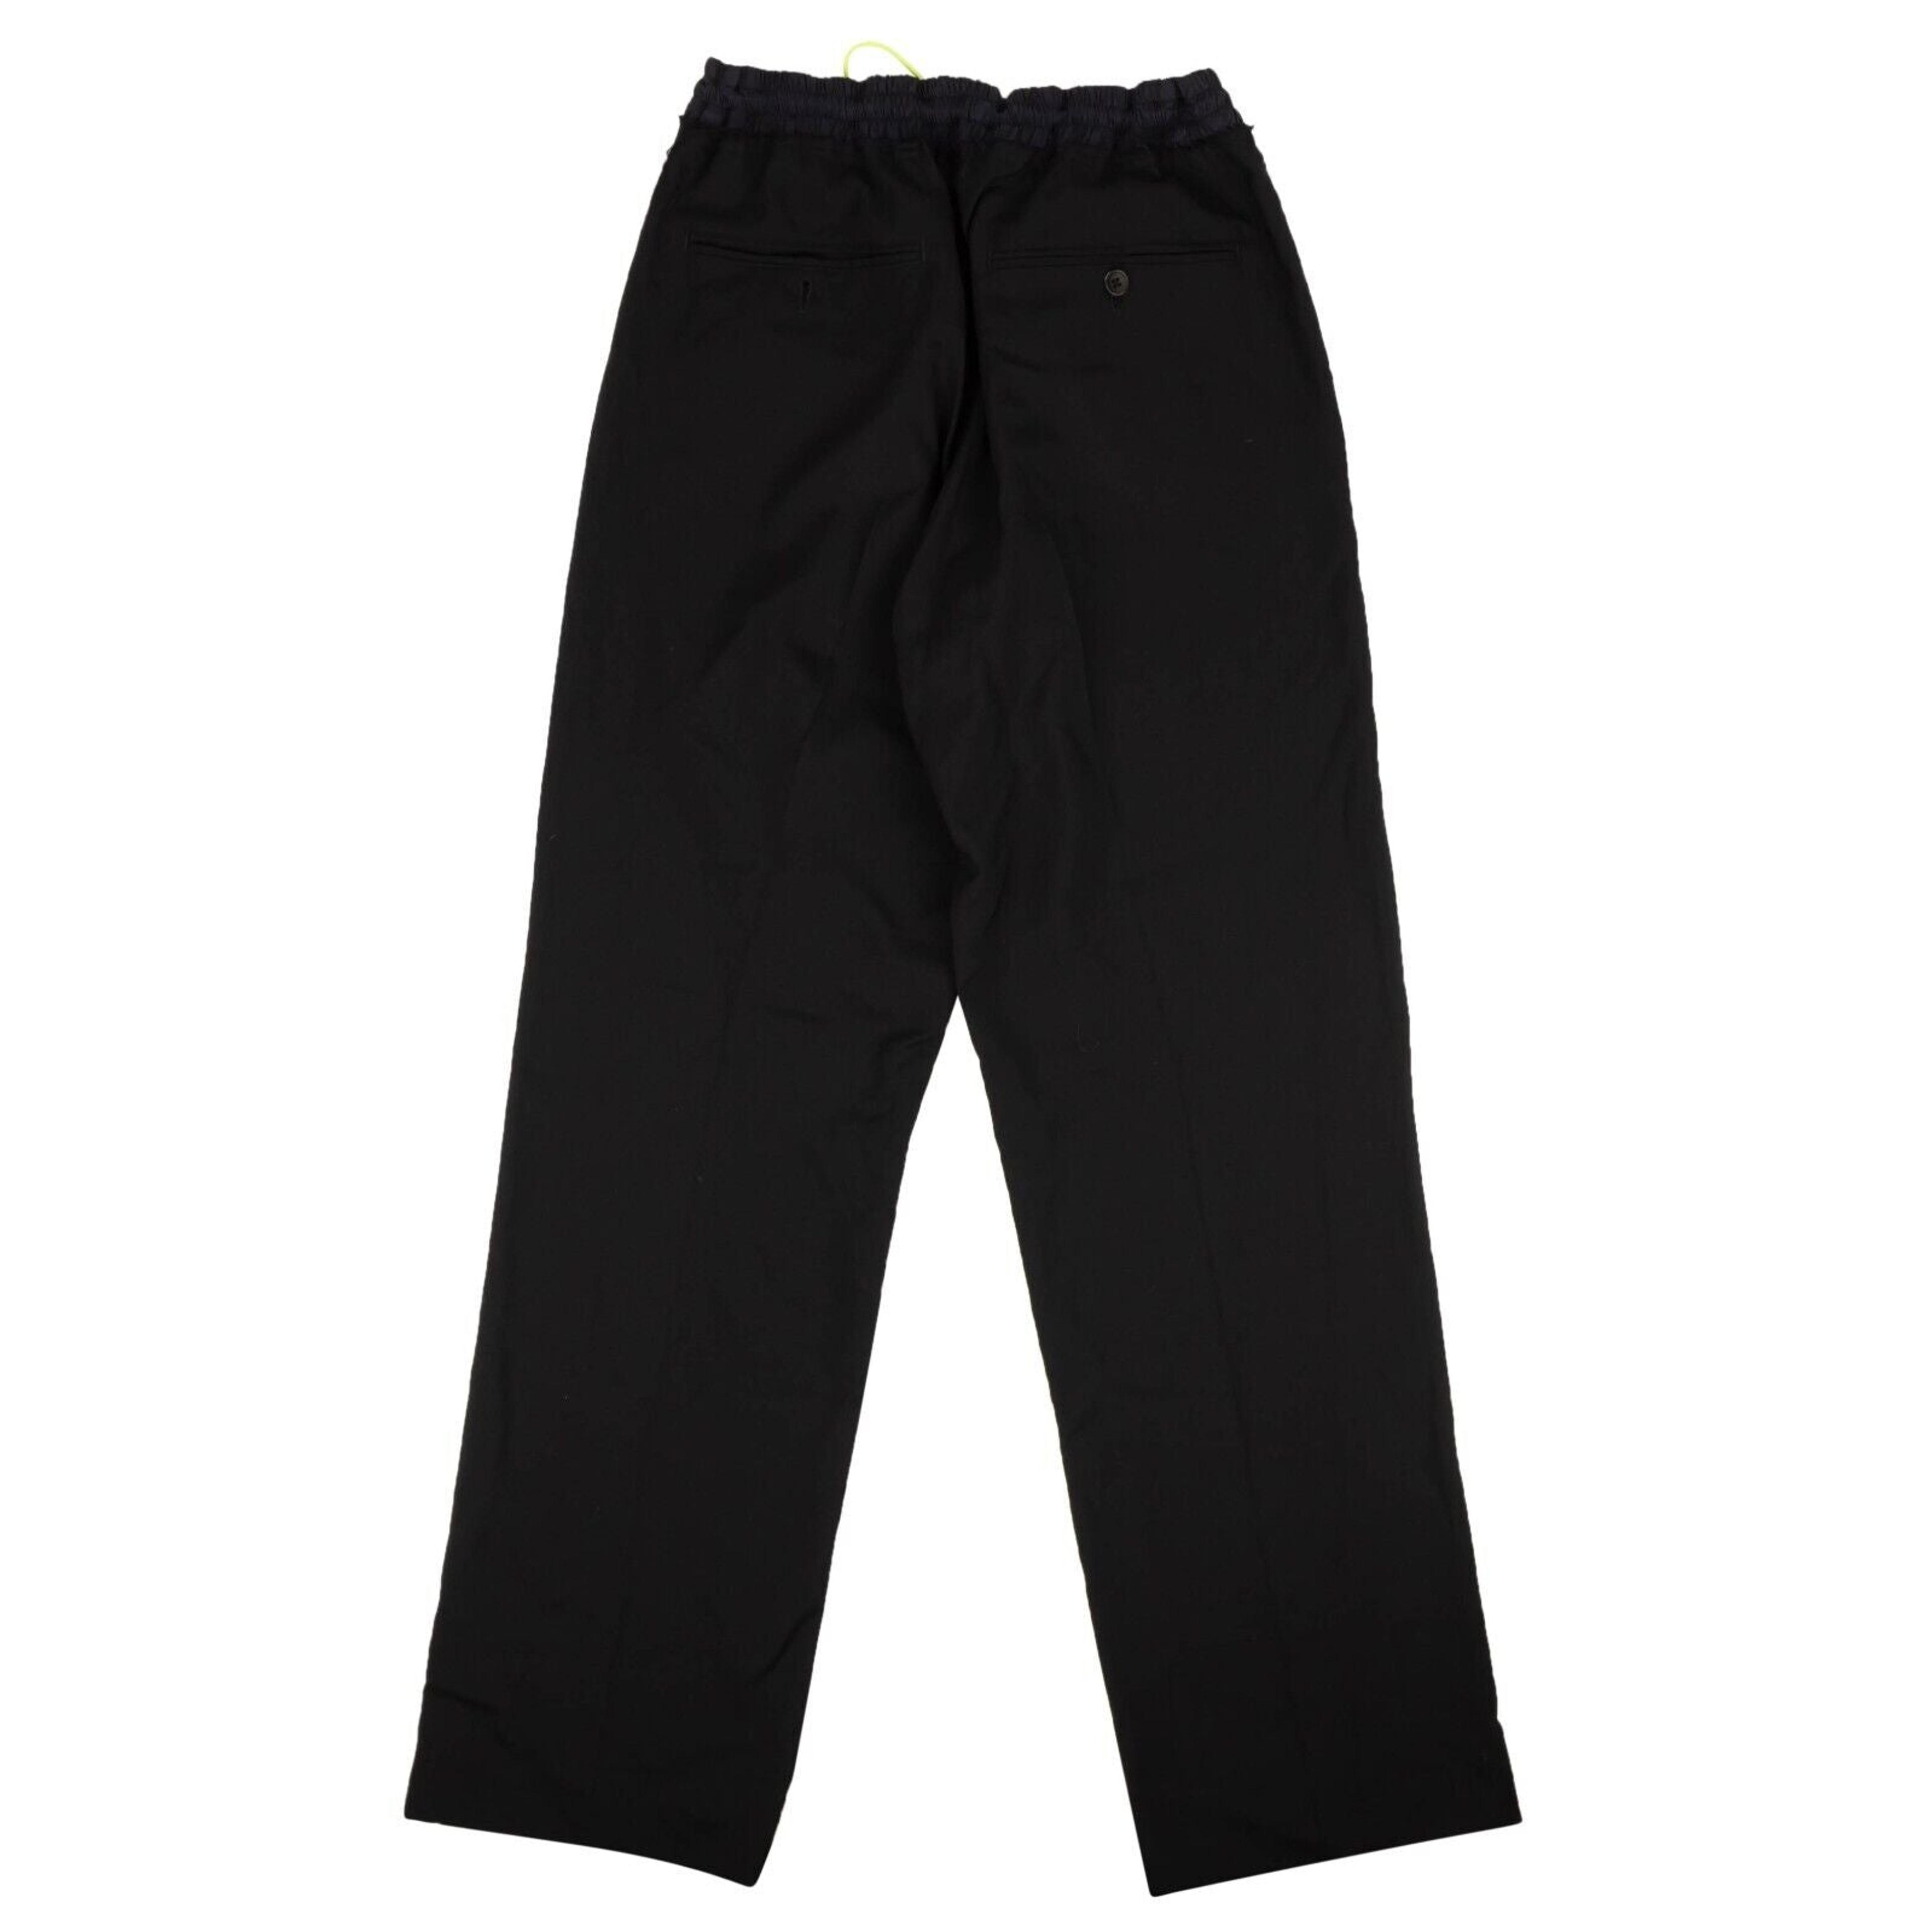 Alternate View 2 of Name Layered Waist Easy Wool Trousers - Black/Blue